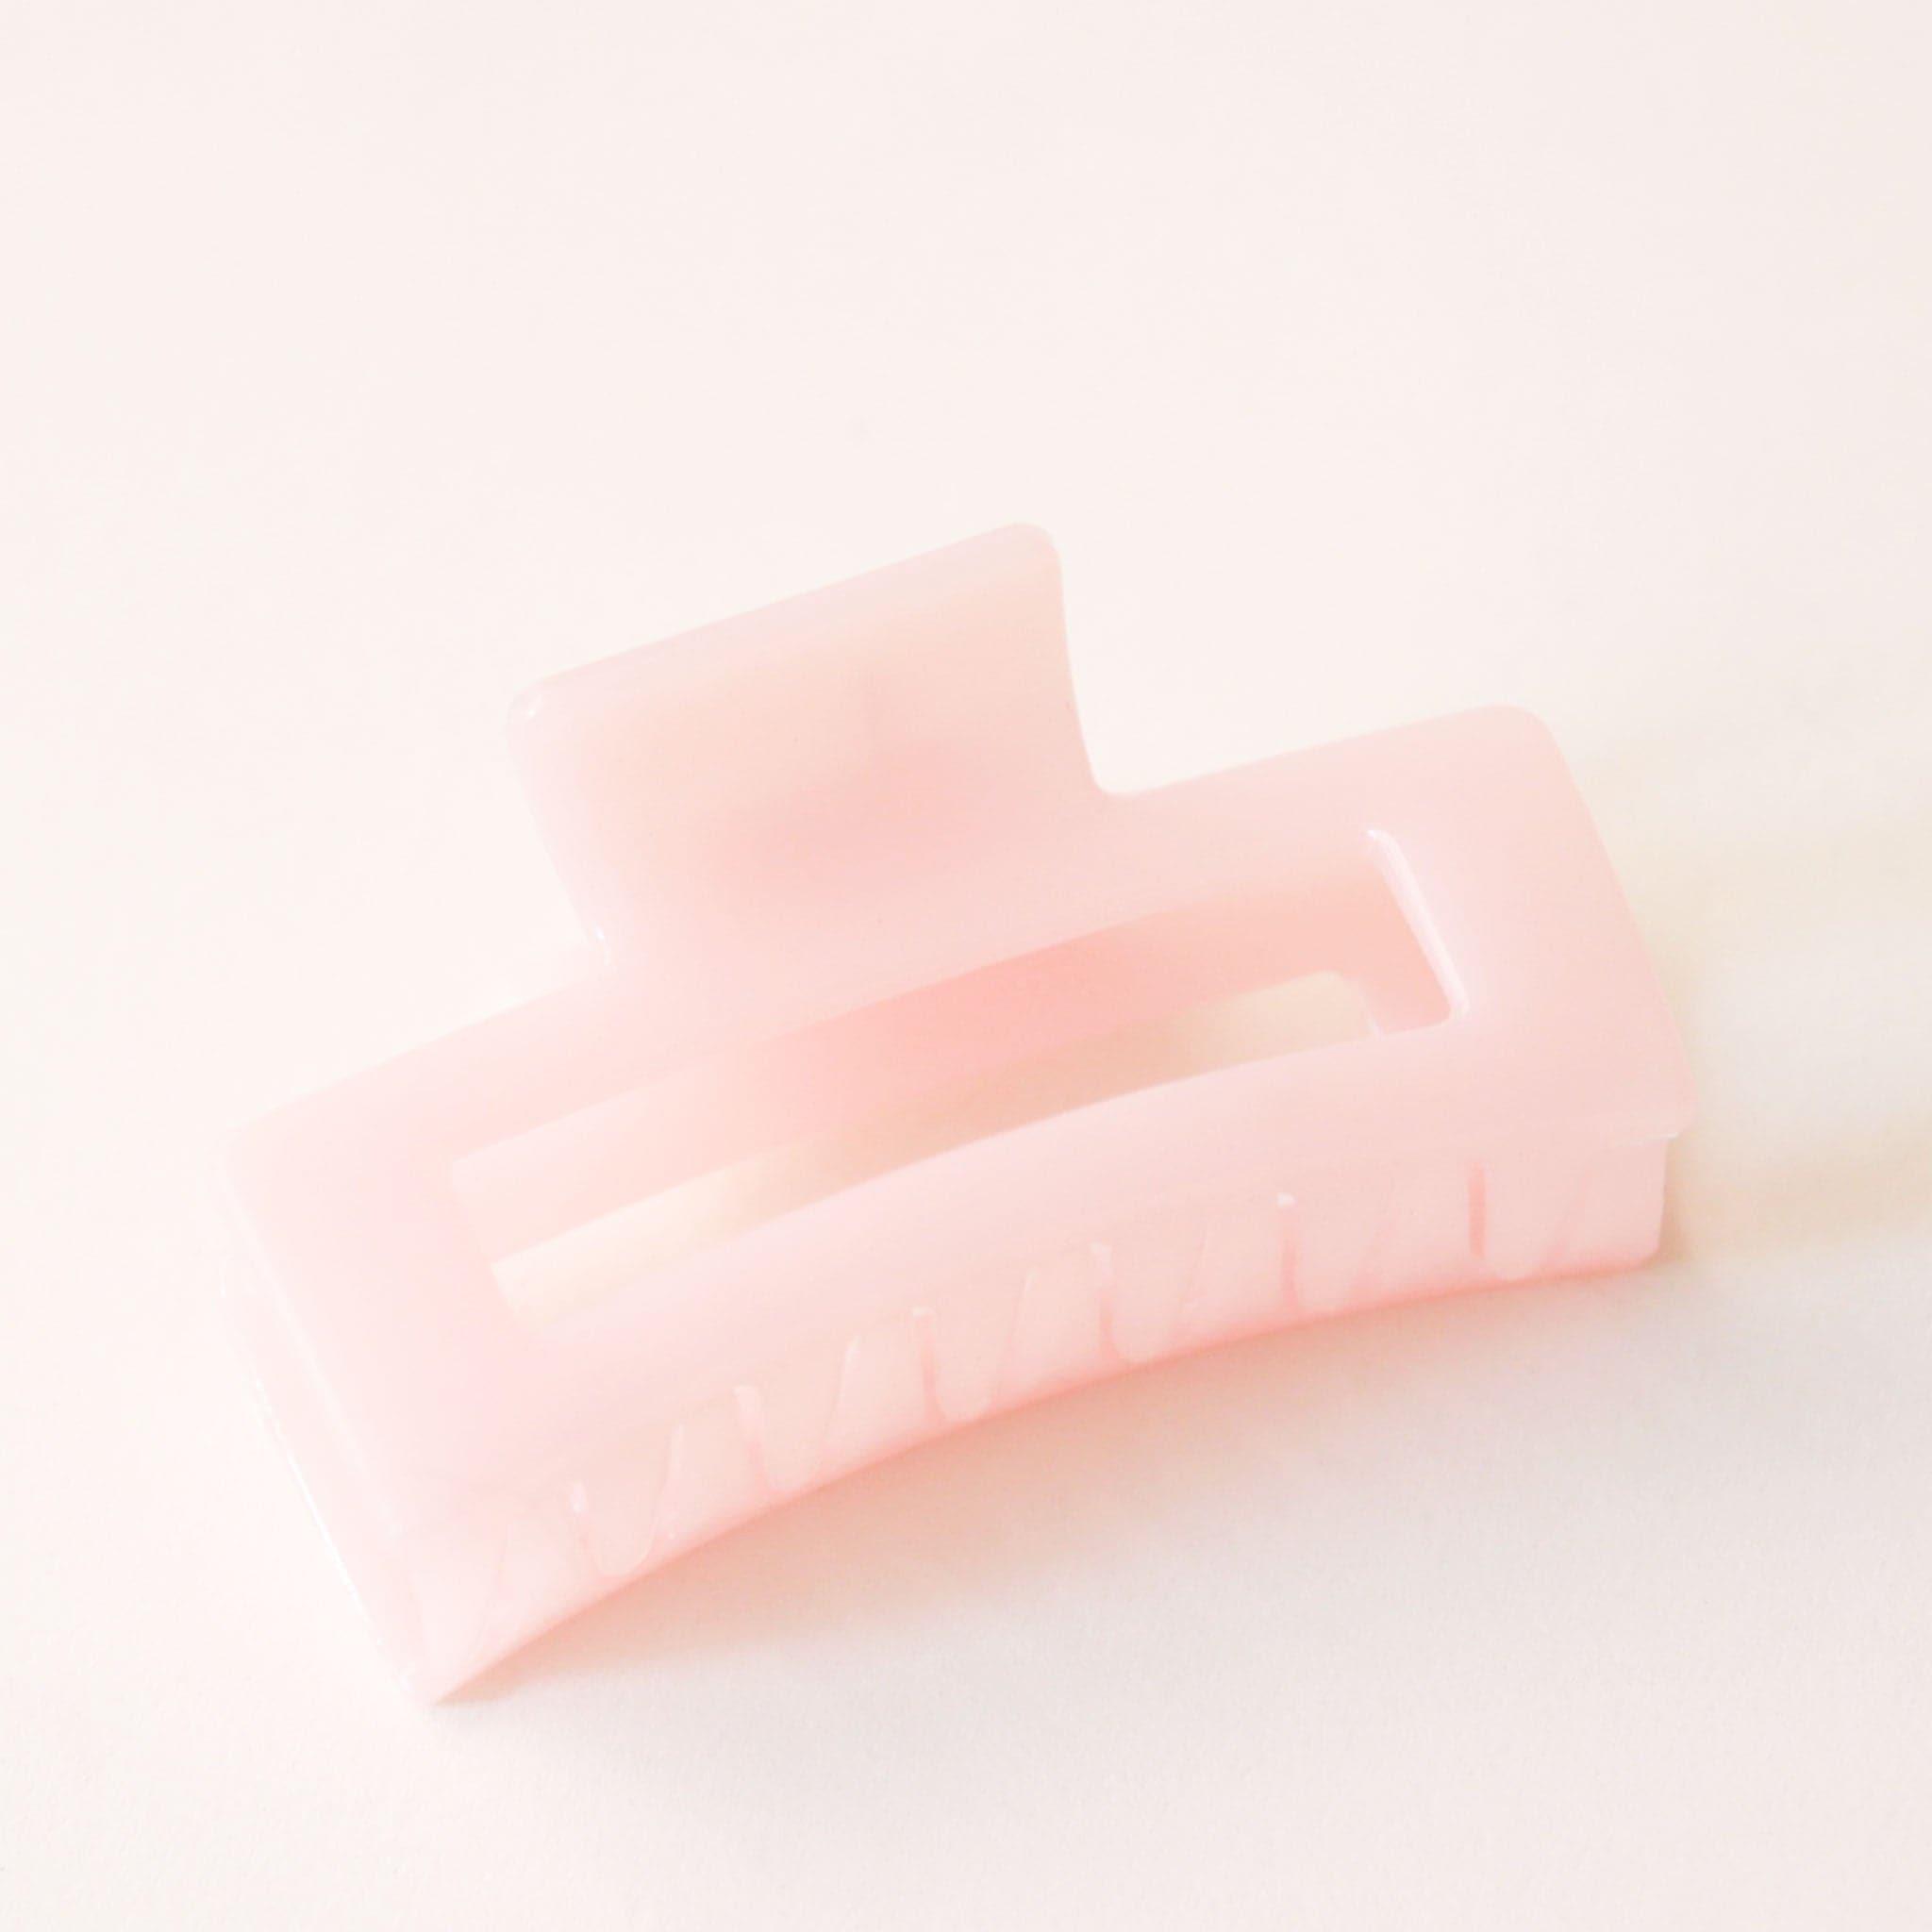 On a white background is a light pink colored rectangular claw clip with a jelly, almost translucent effect.